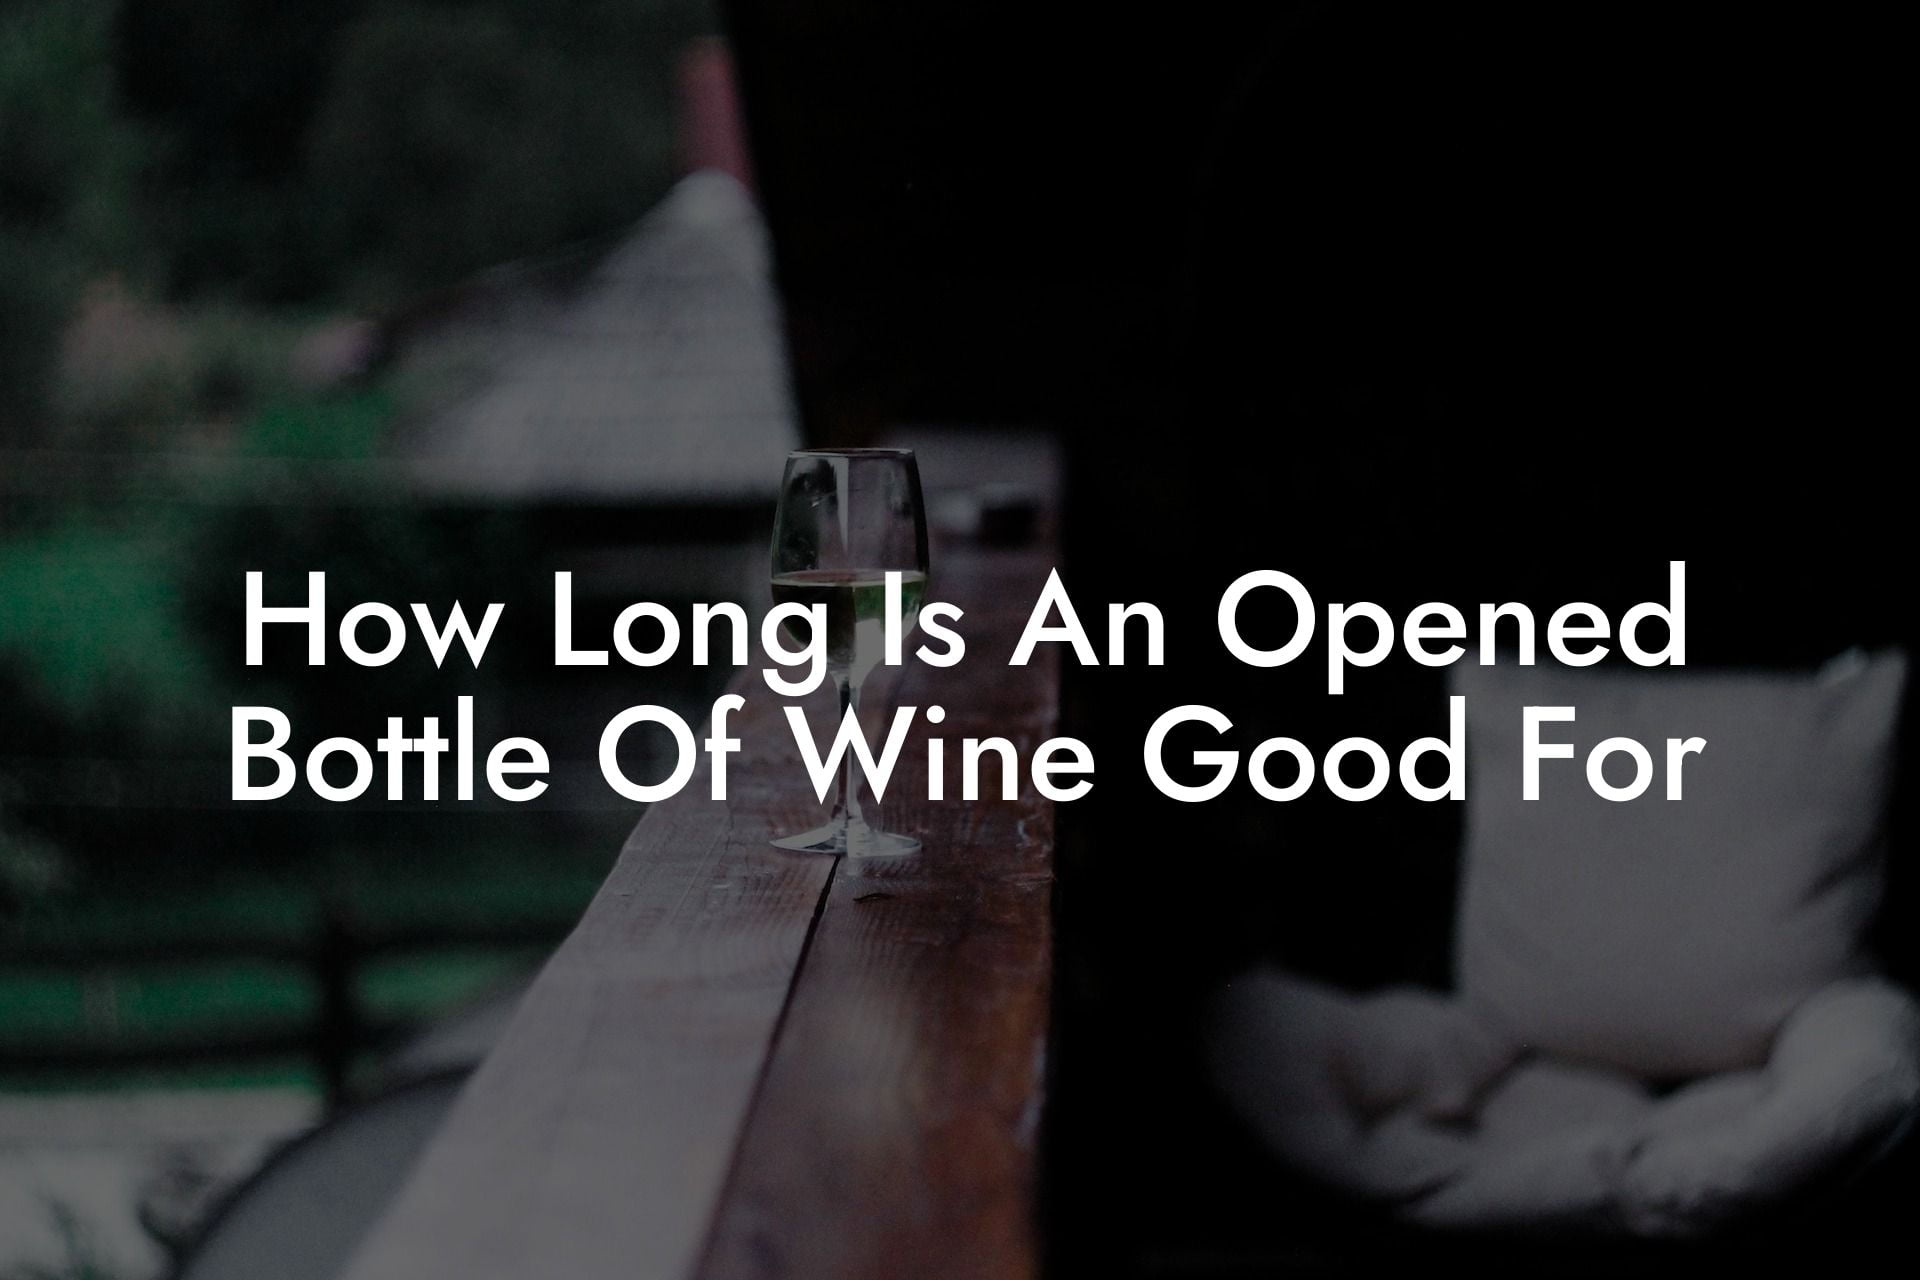 How Long Is An Opened Bottle Of Wine Good For